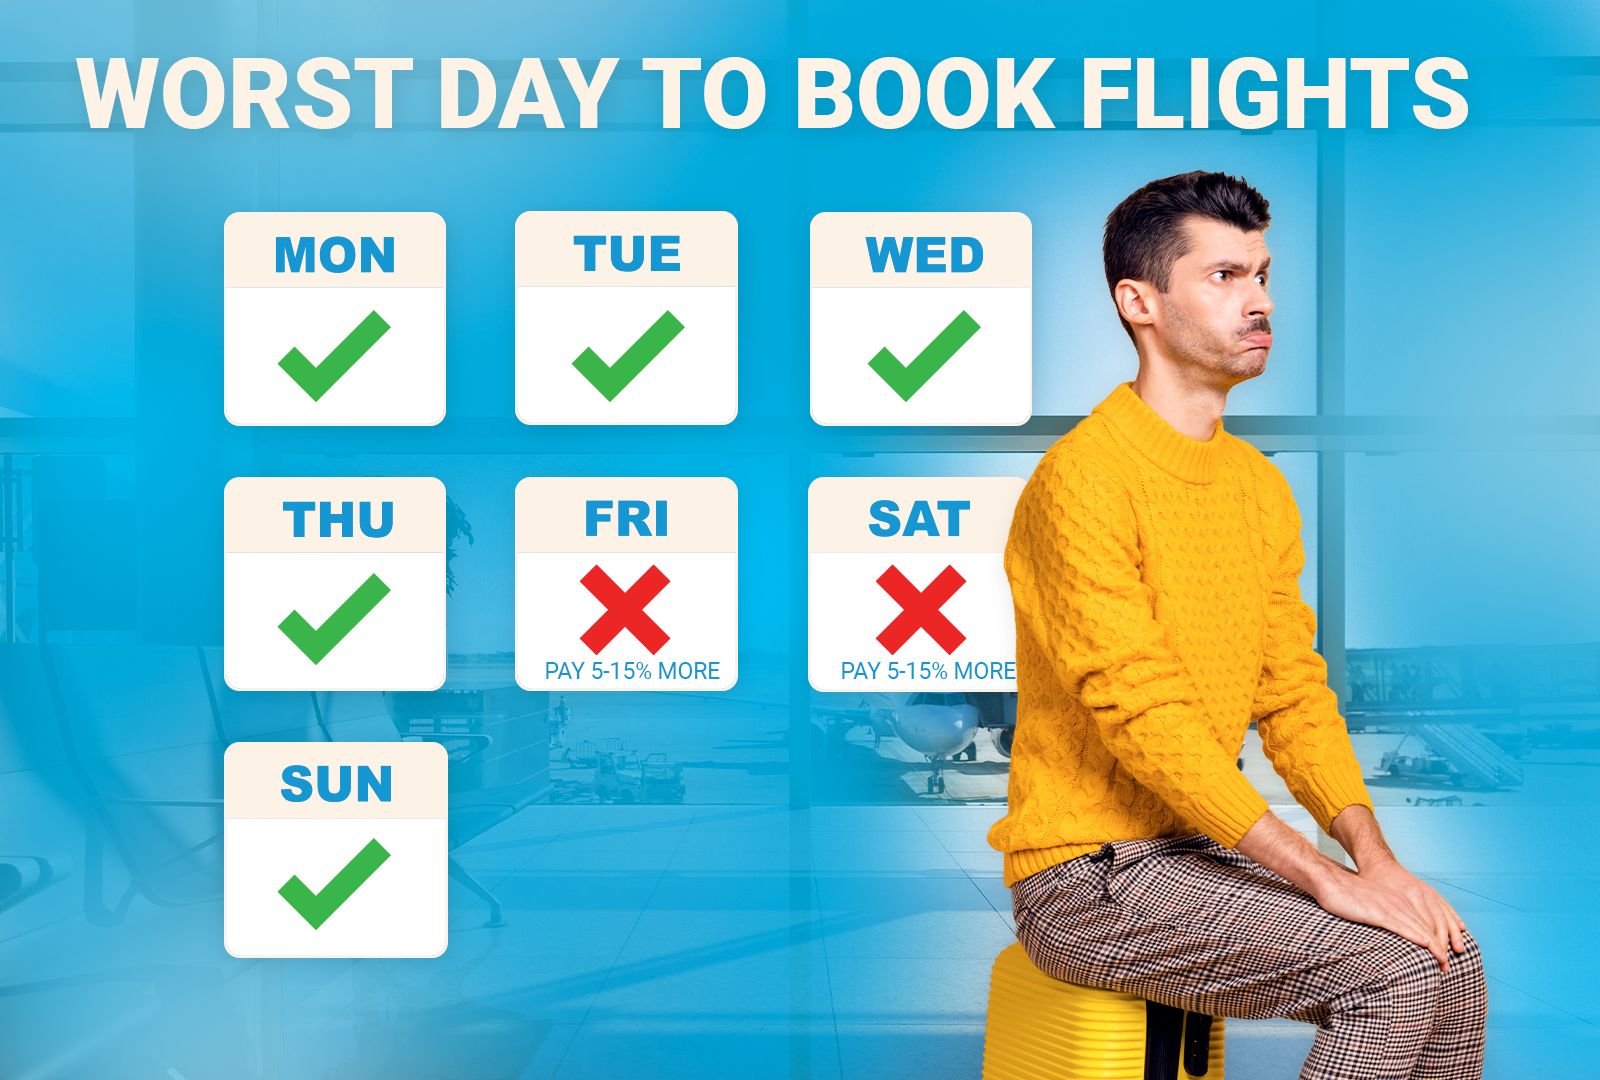 Man sitting on a suitcase next to a calendar with the worst day to book flights highlighted